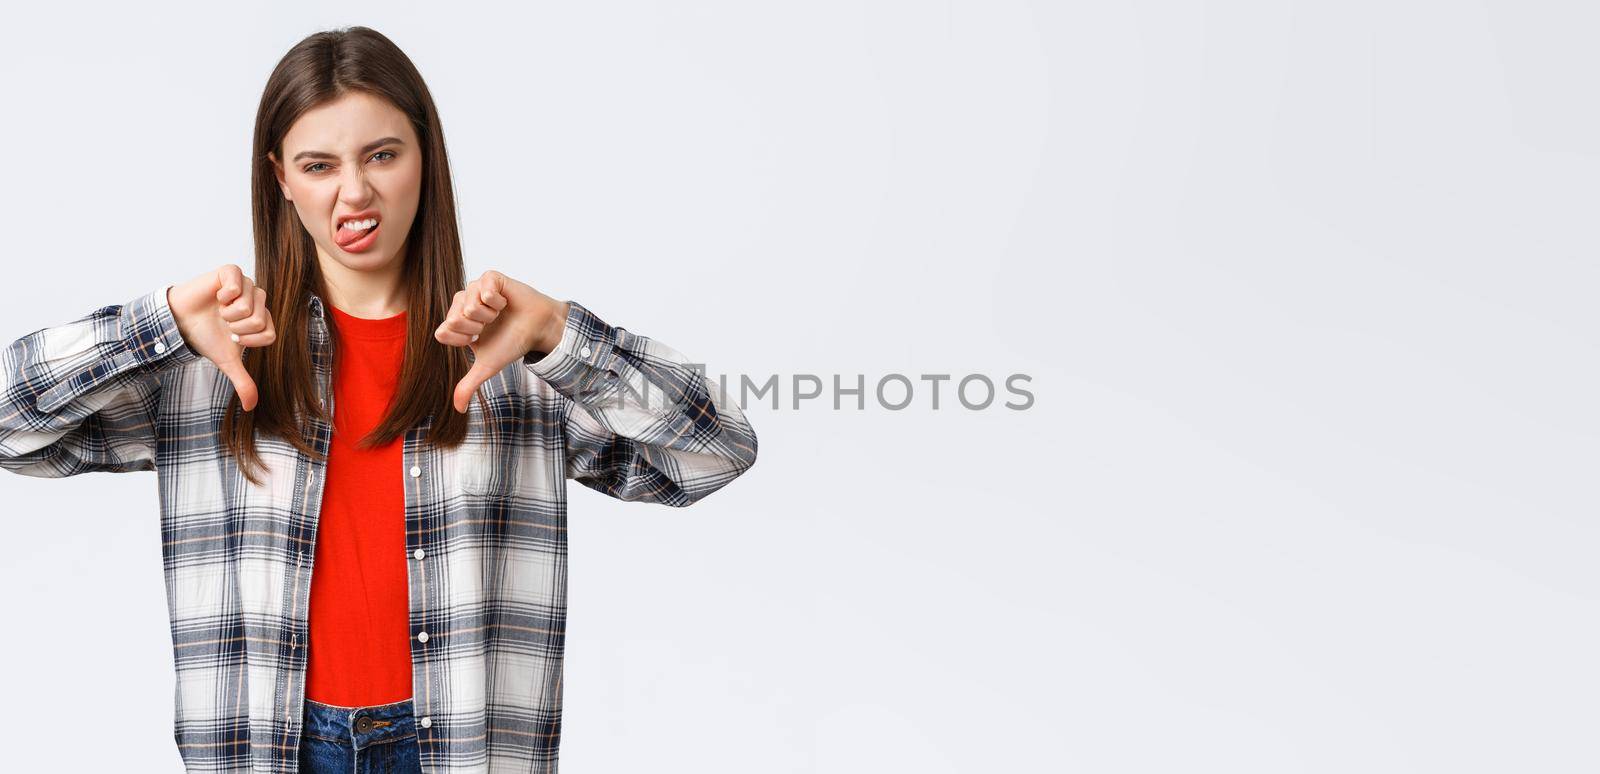 Lifestyle, different emotions, leisure activities concept. Displeased and unimpressed young picky girl in checked shirt, thumb-down and show tongue to express dislike, rate awful movie.